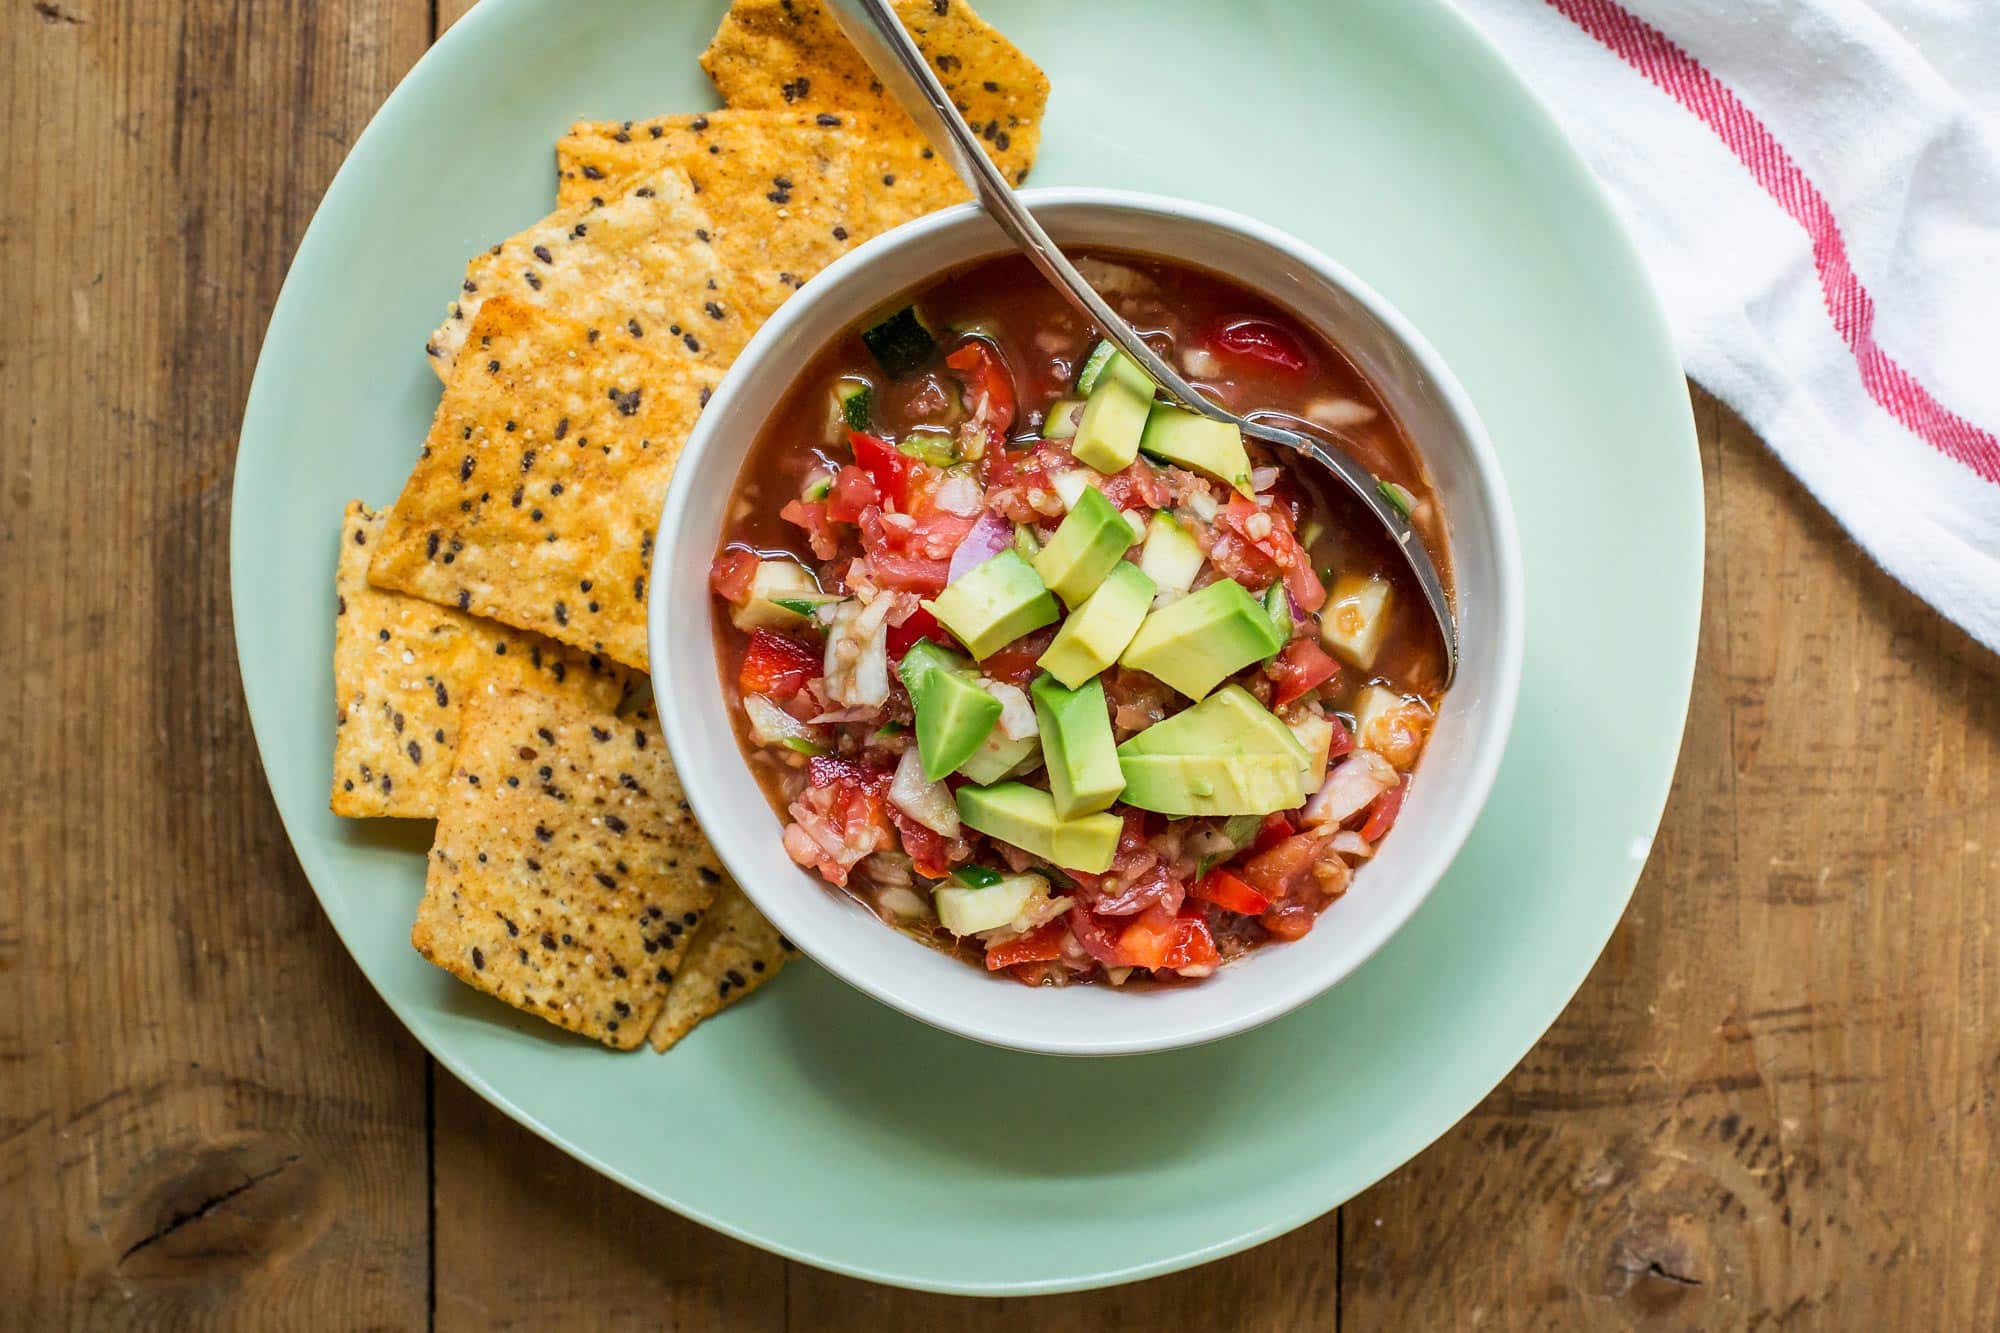 Gazpacho in a bowl on a plate with some tortilla chips.